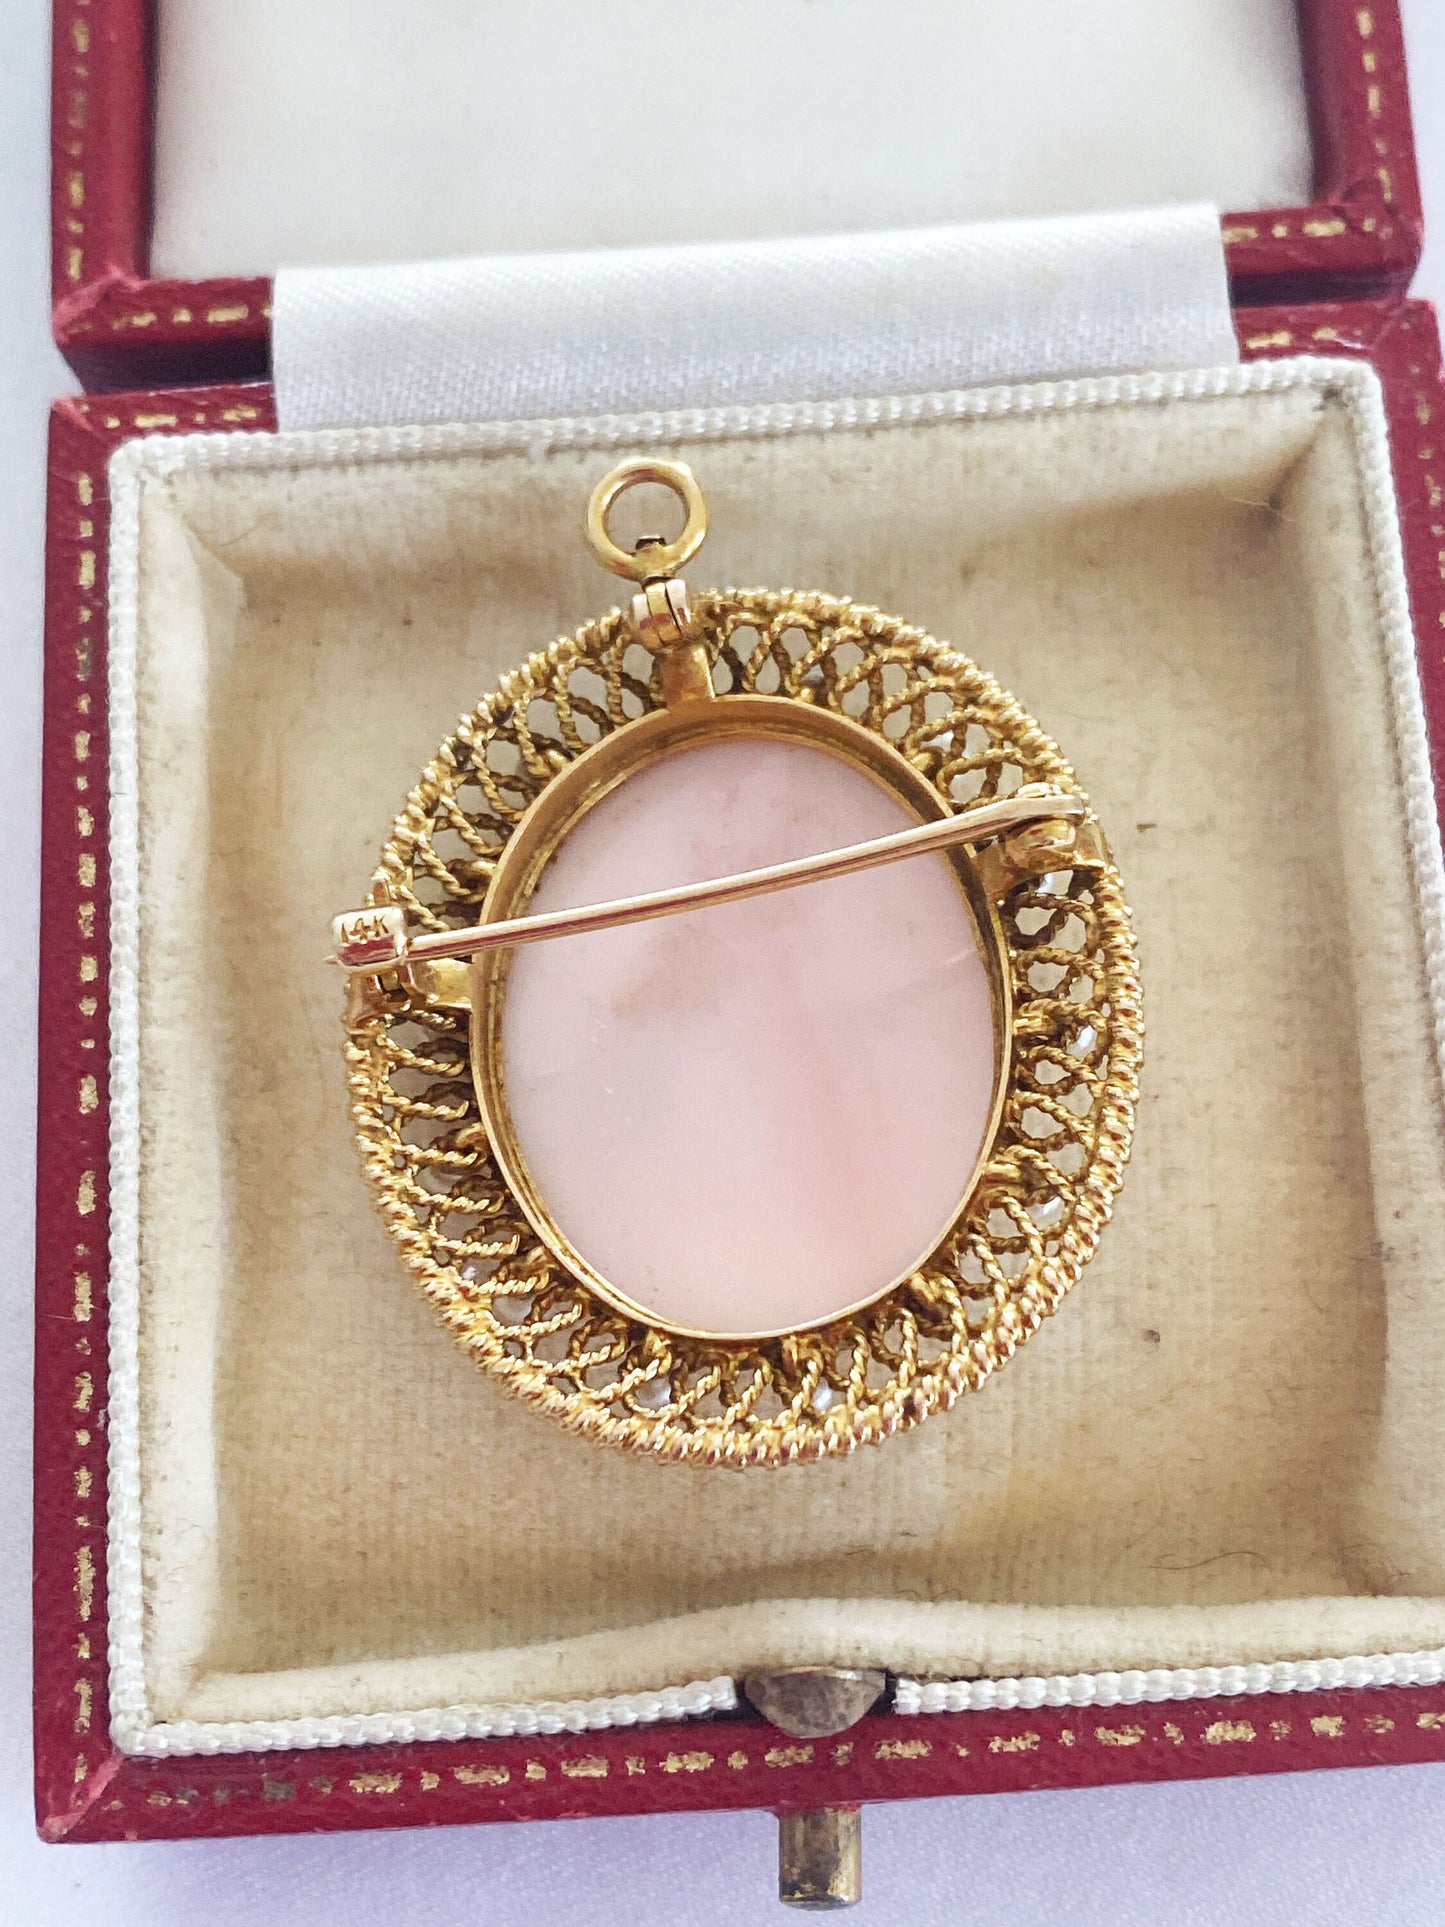 1900s 14k Gold and Pearl Cameo Convertible Brooch Antique Pendant Romantic Cameo Art Nouveau Gift for Her